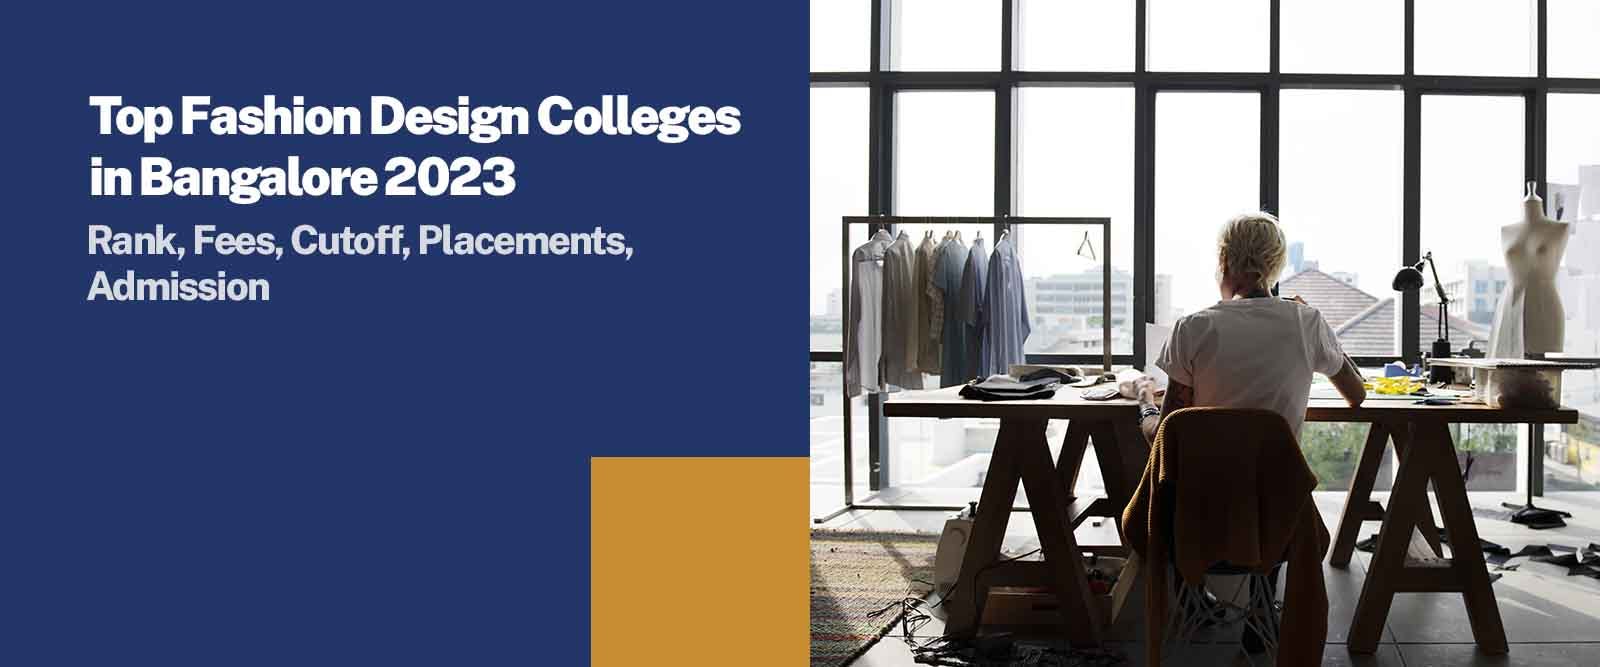 Top Fashion Design Colleges in Bangalore Fees, Placements